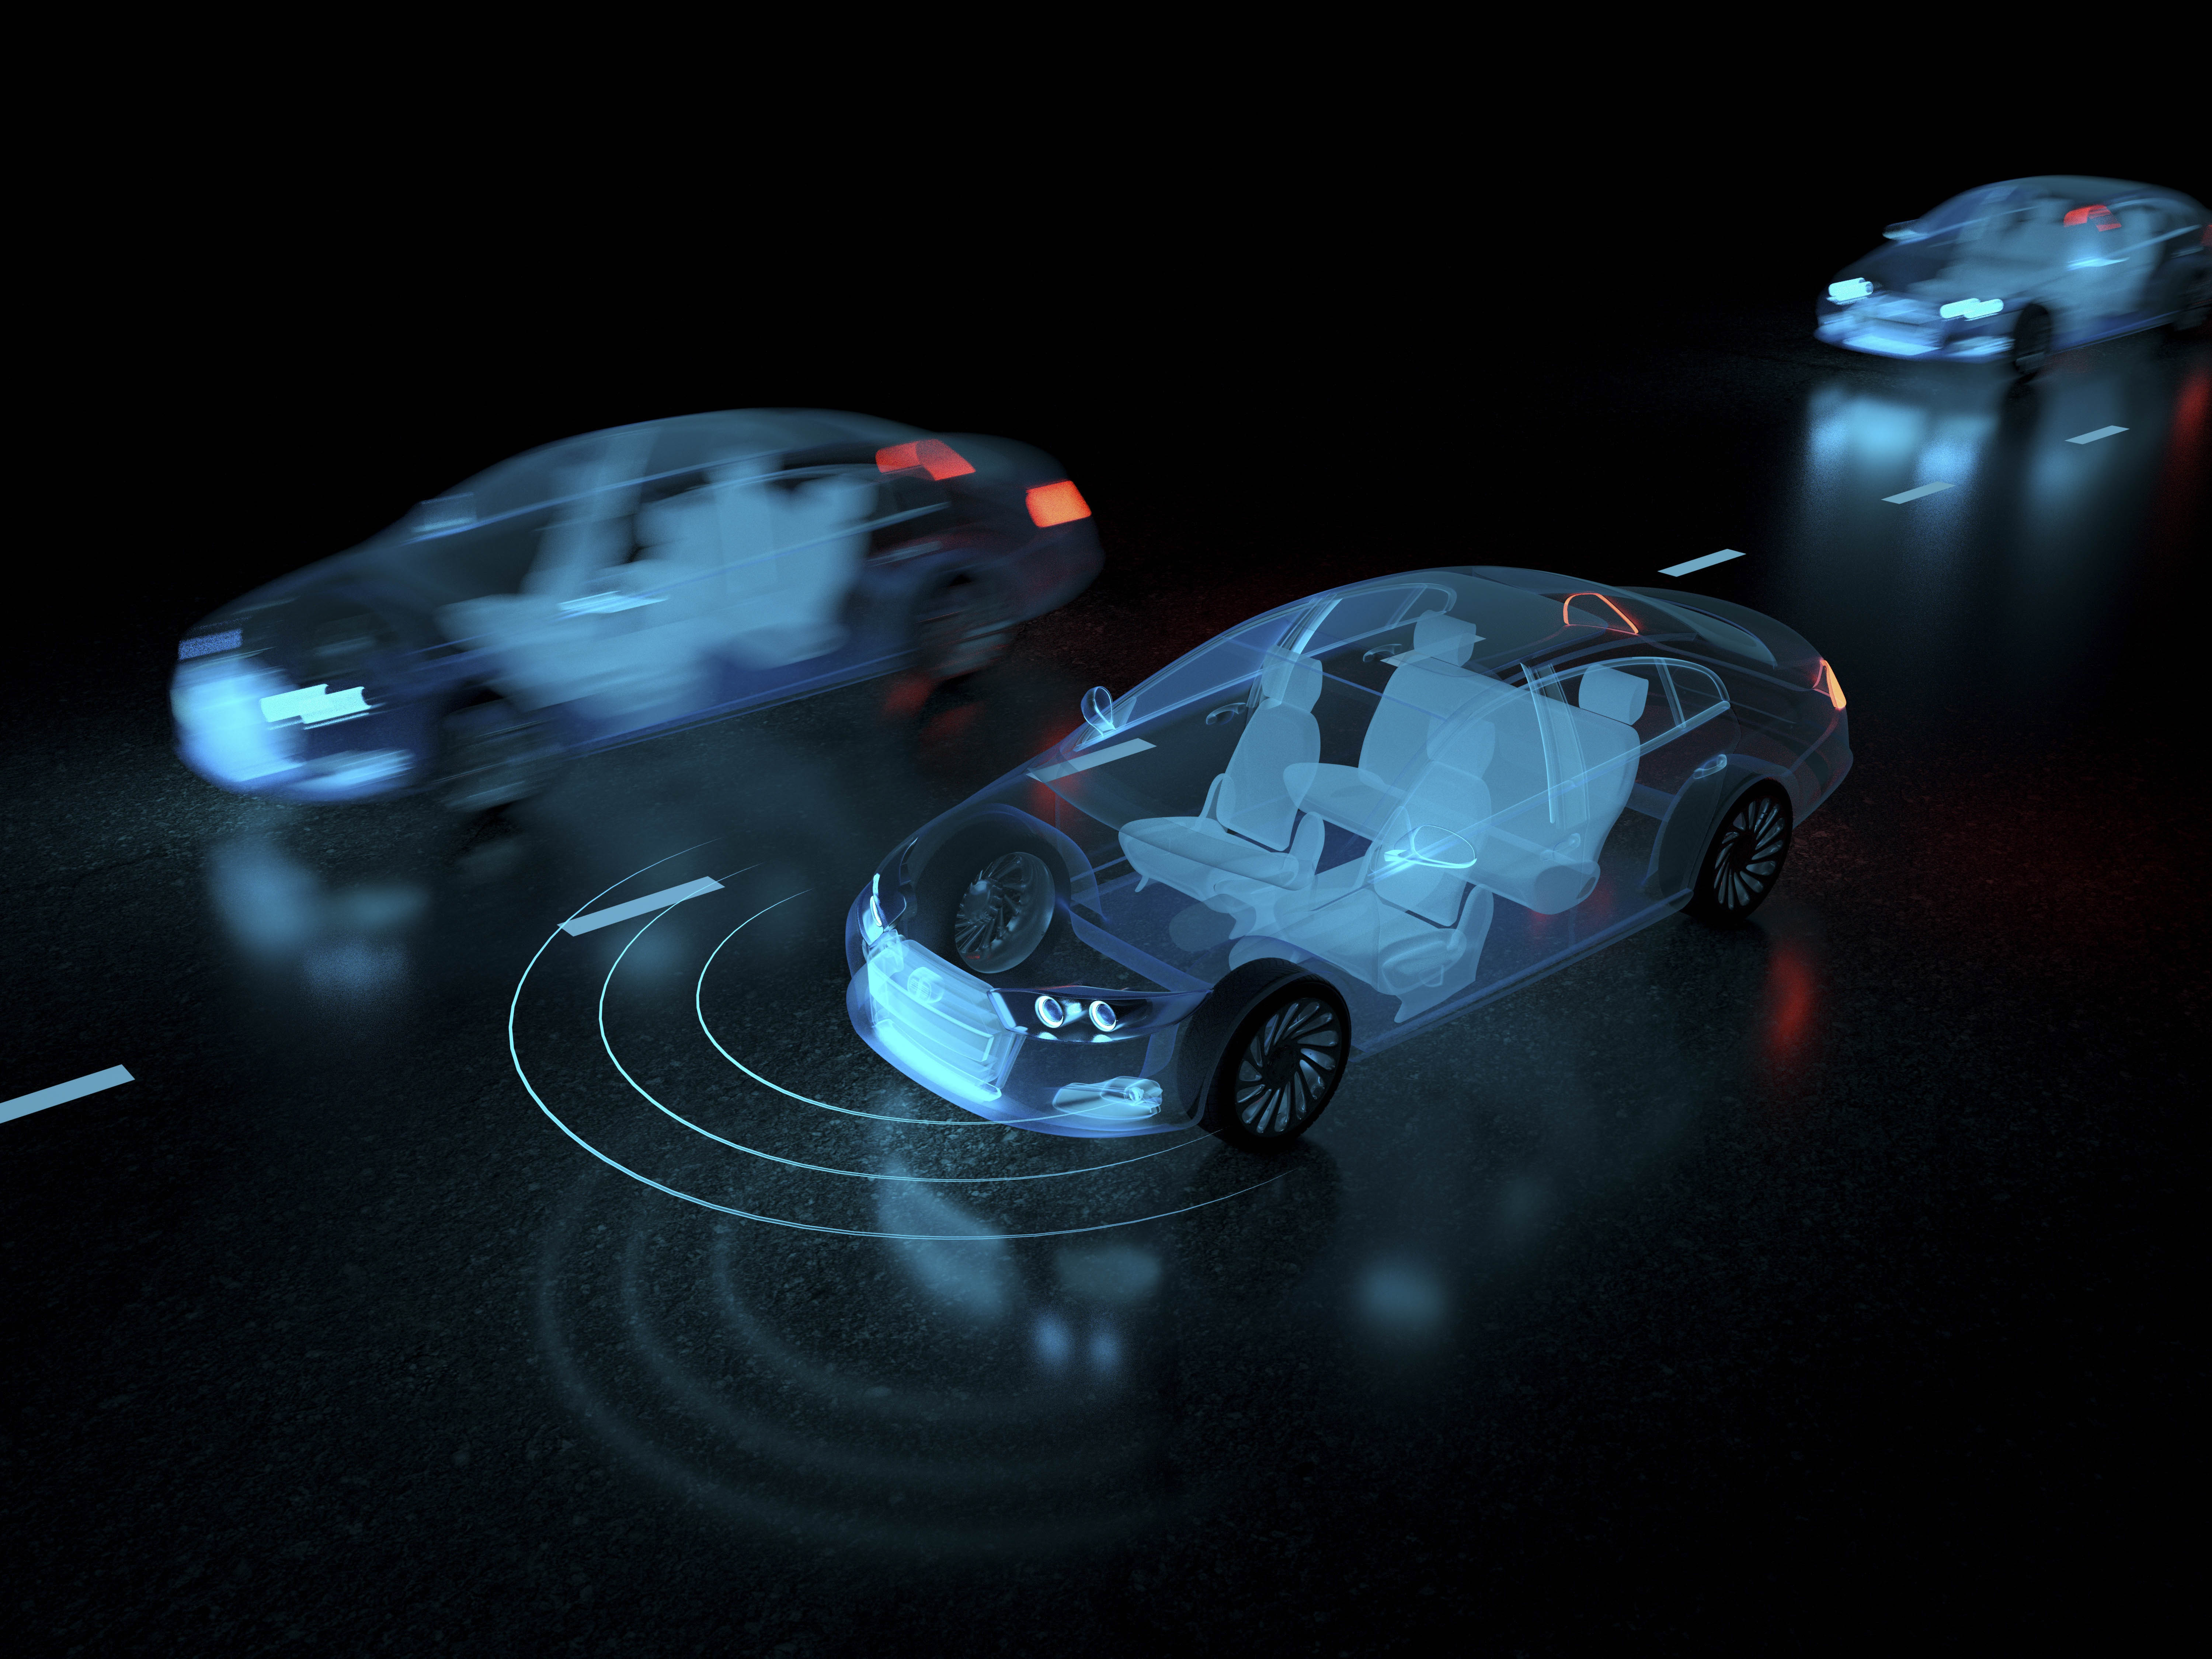 Real-Time Innovations Joins the AVCC to Help Define an Architecture for Highly Autonomous Vehicles